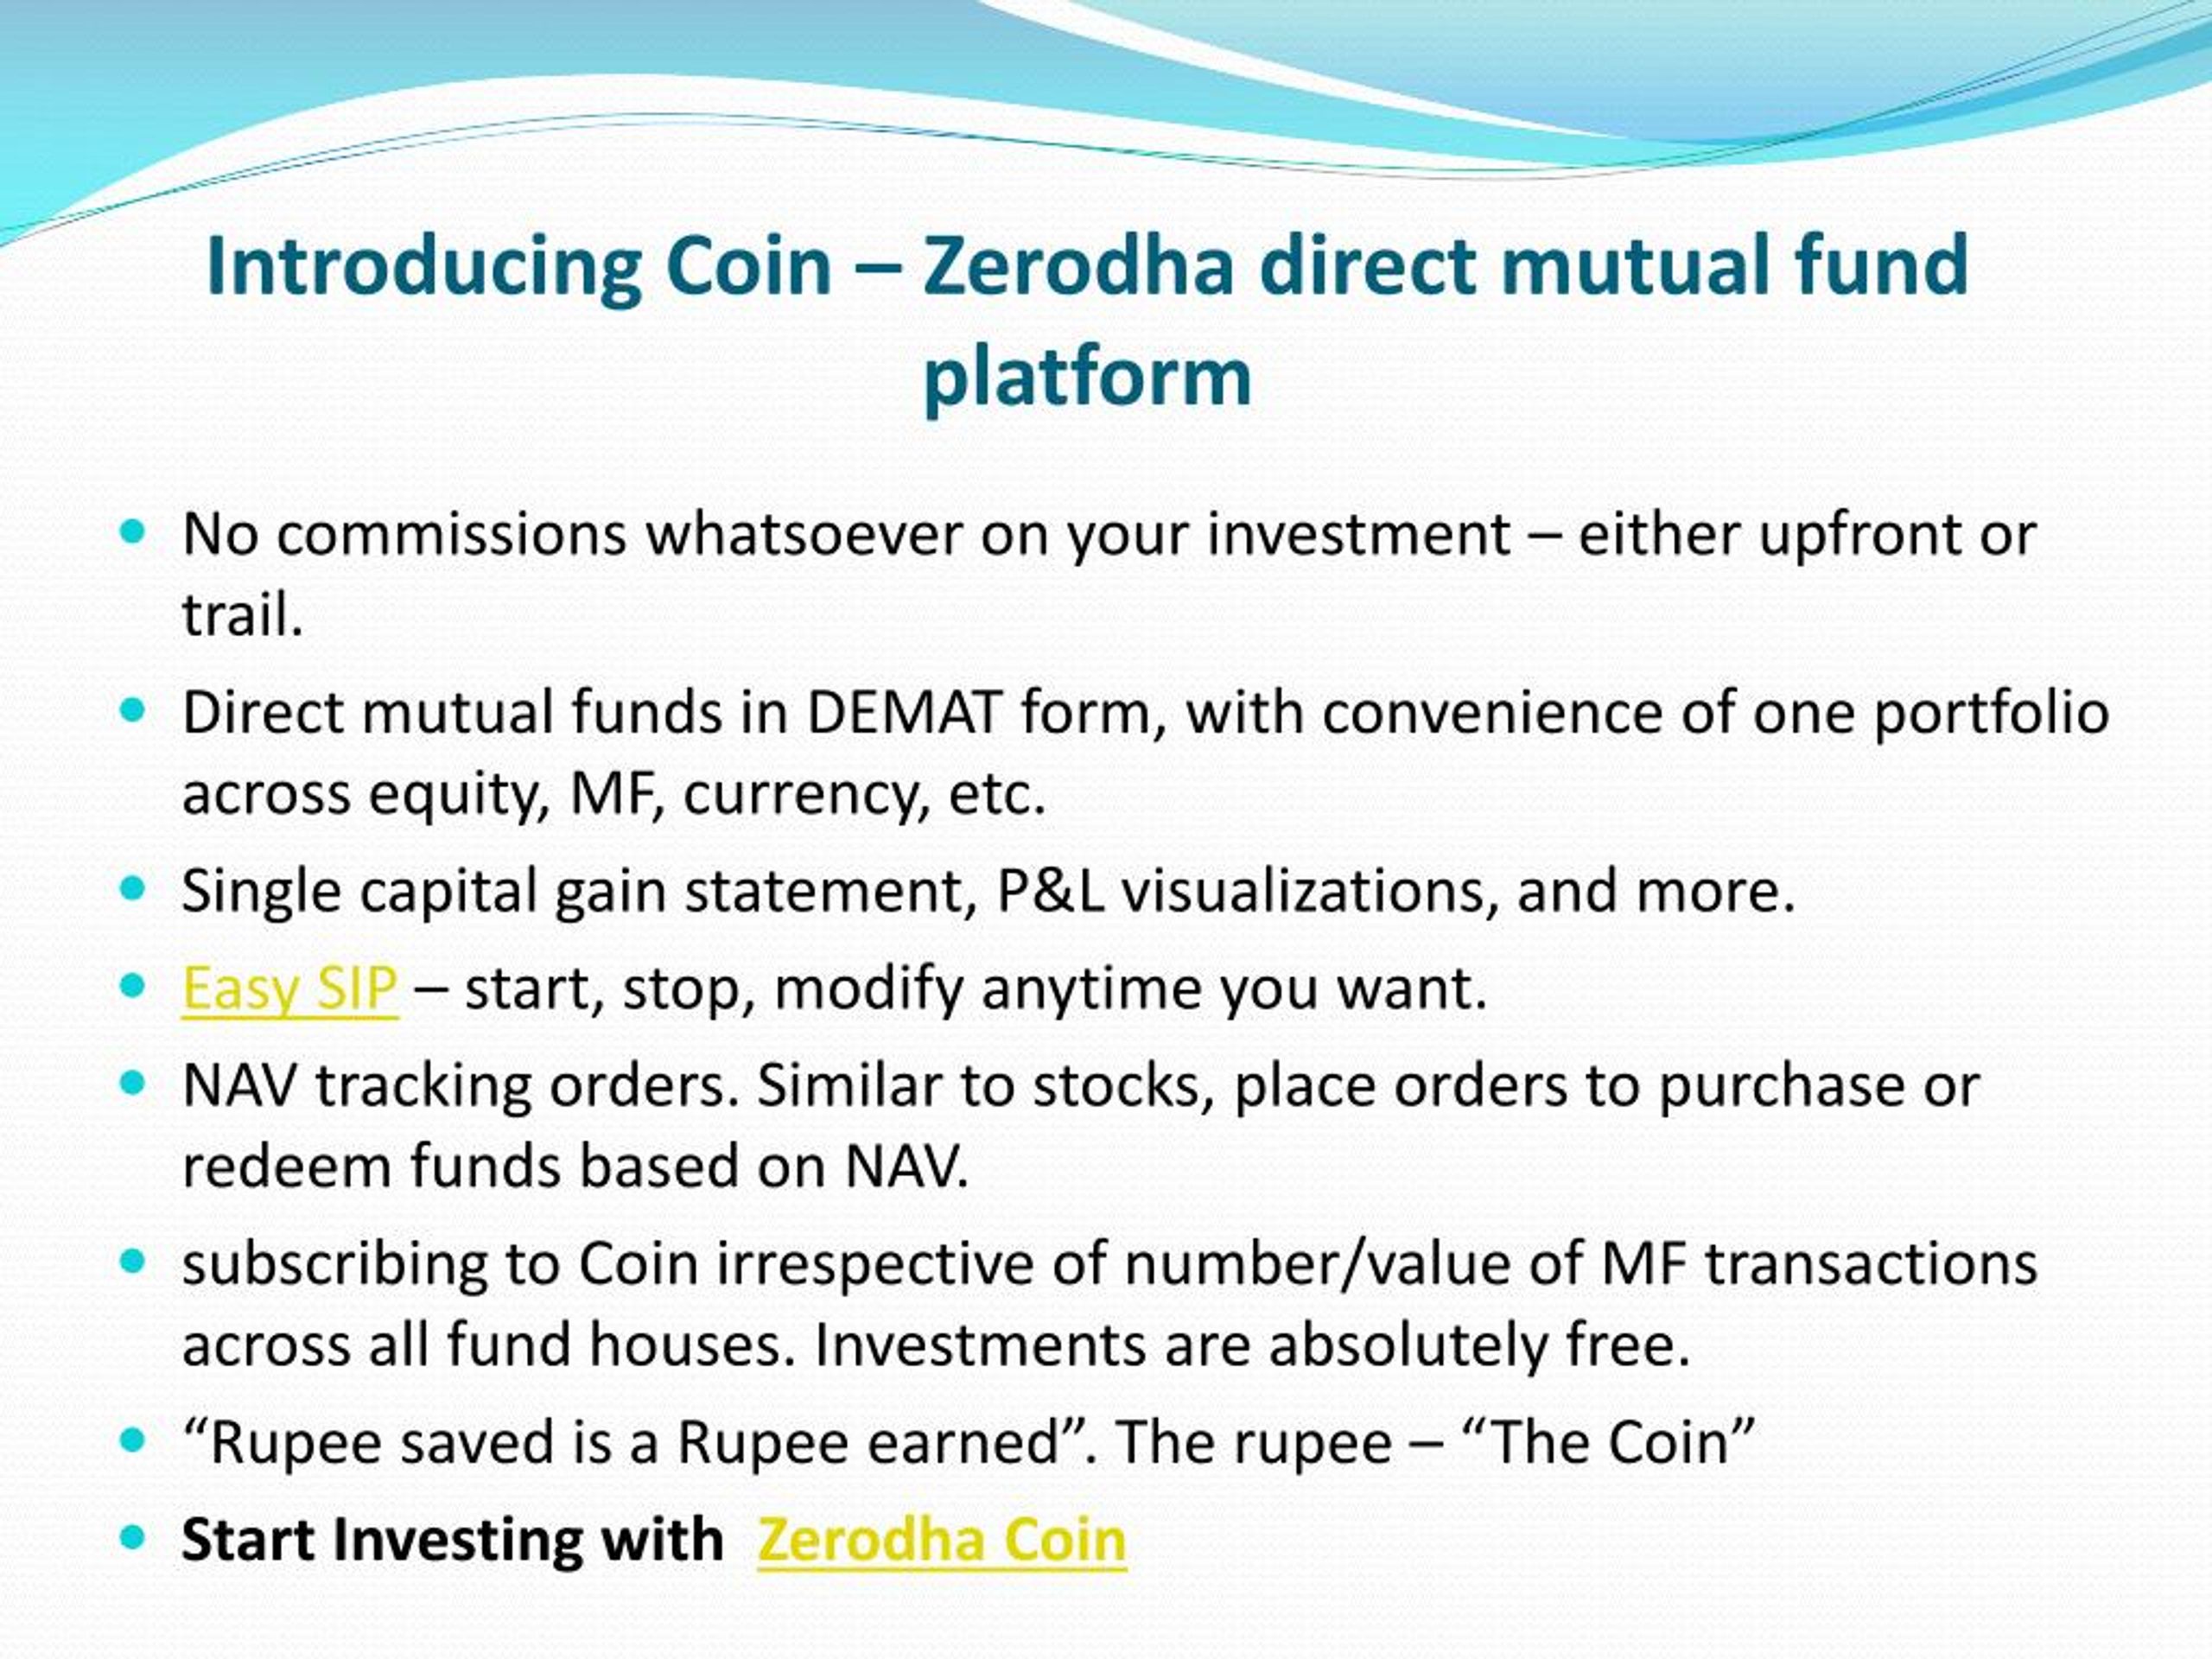 Ppt Zerodha Coin Charges Zerodha Coin Review Investallign Powerpoint Presentation Id8024702 9578